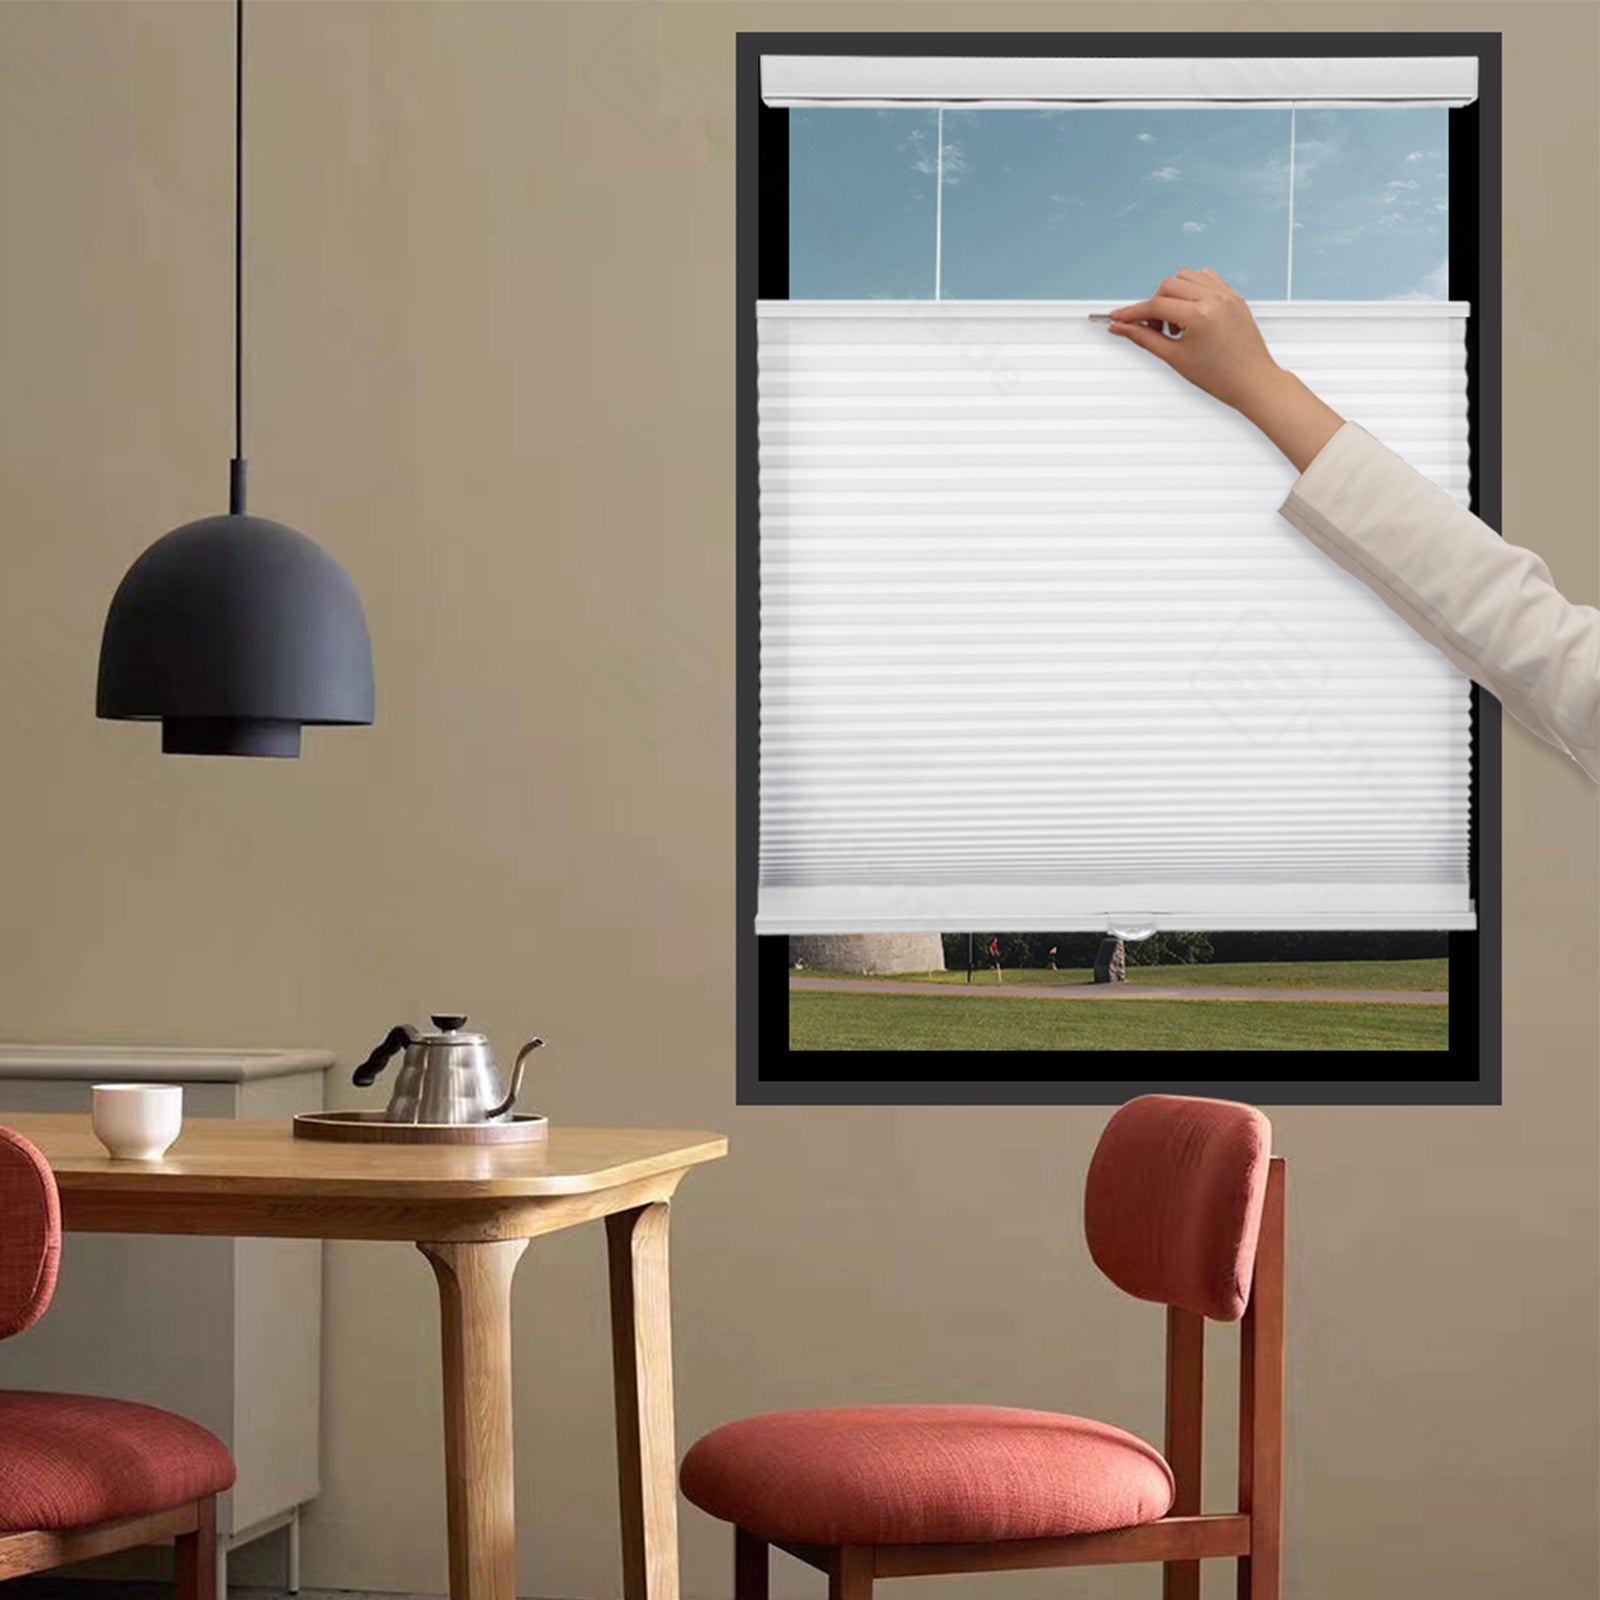 Custom MYshade Top Down Bottom Up Shades Light Filtering Shades Cordless  Blinds for Windows Cellular Shades Blinds & Shades Window Shade Easy to